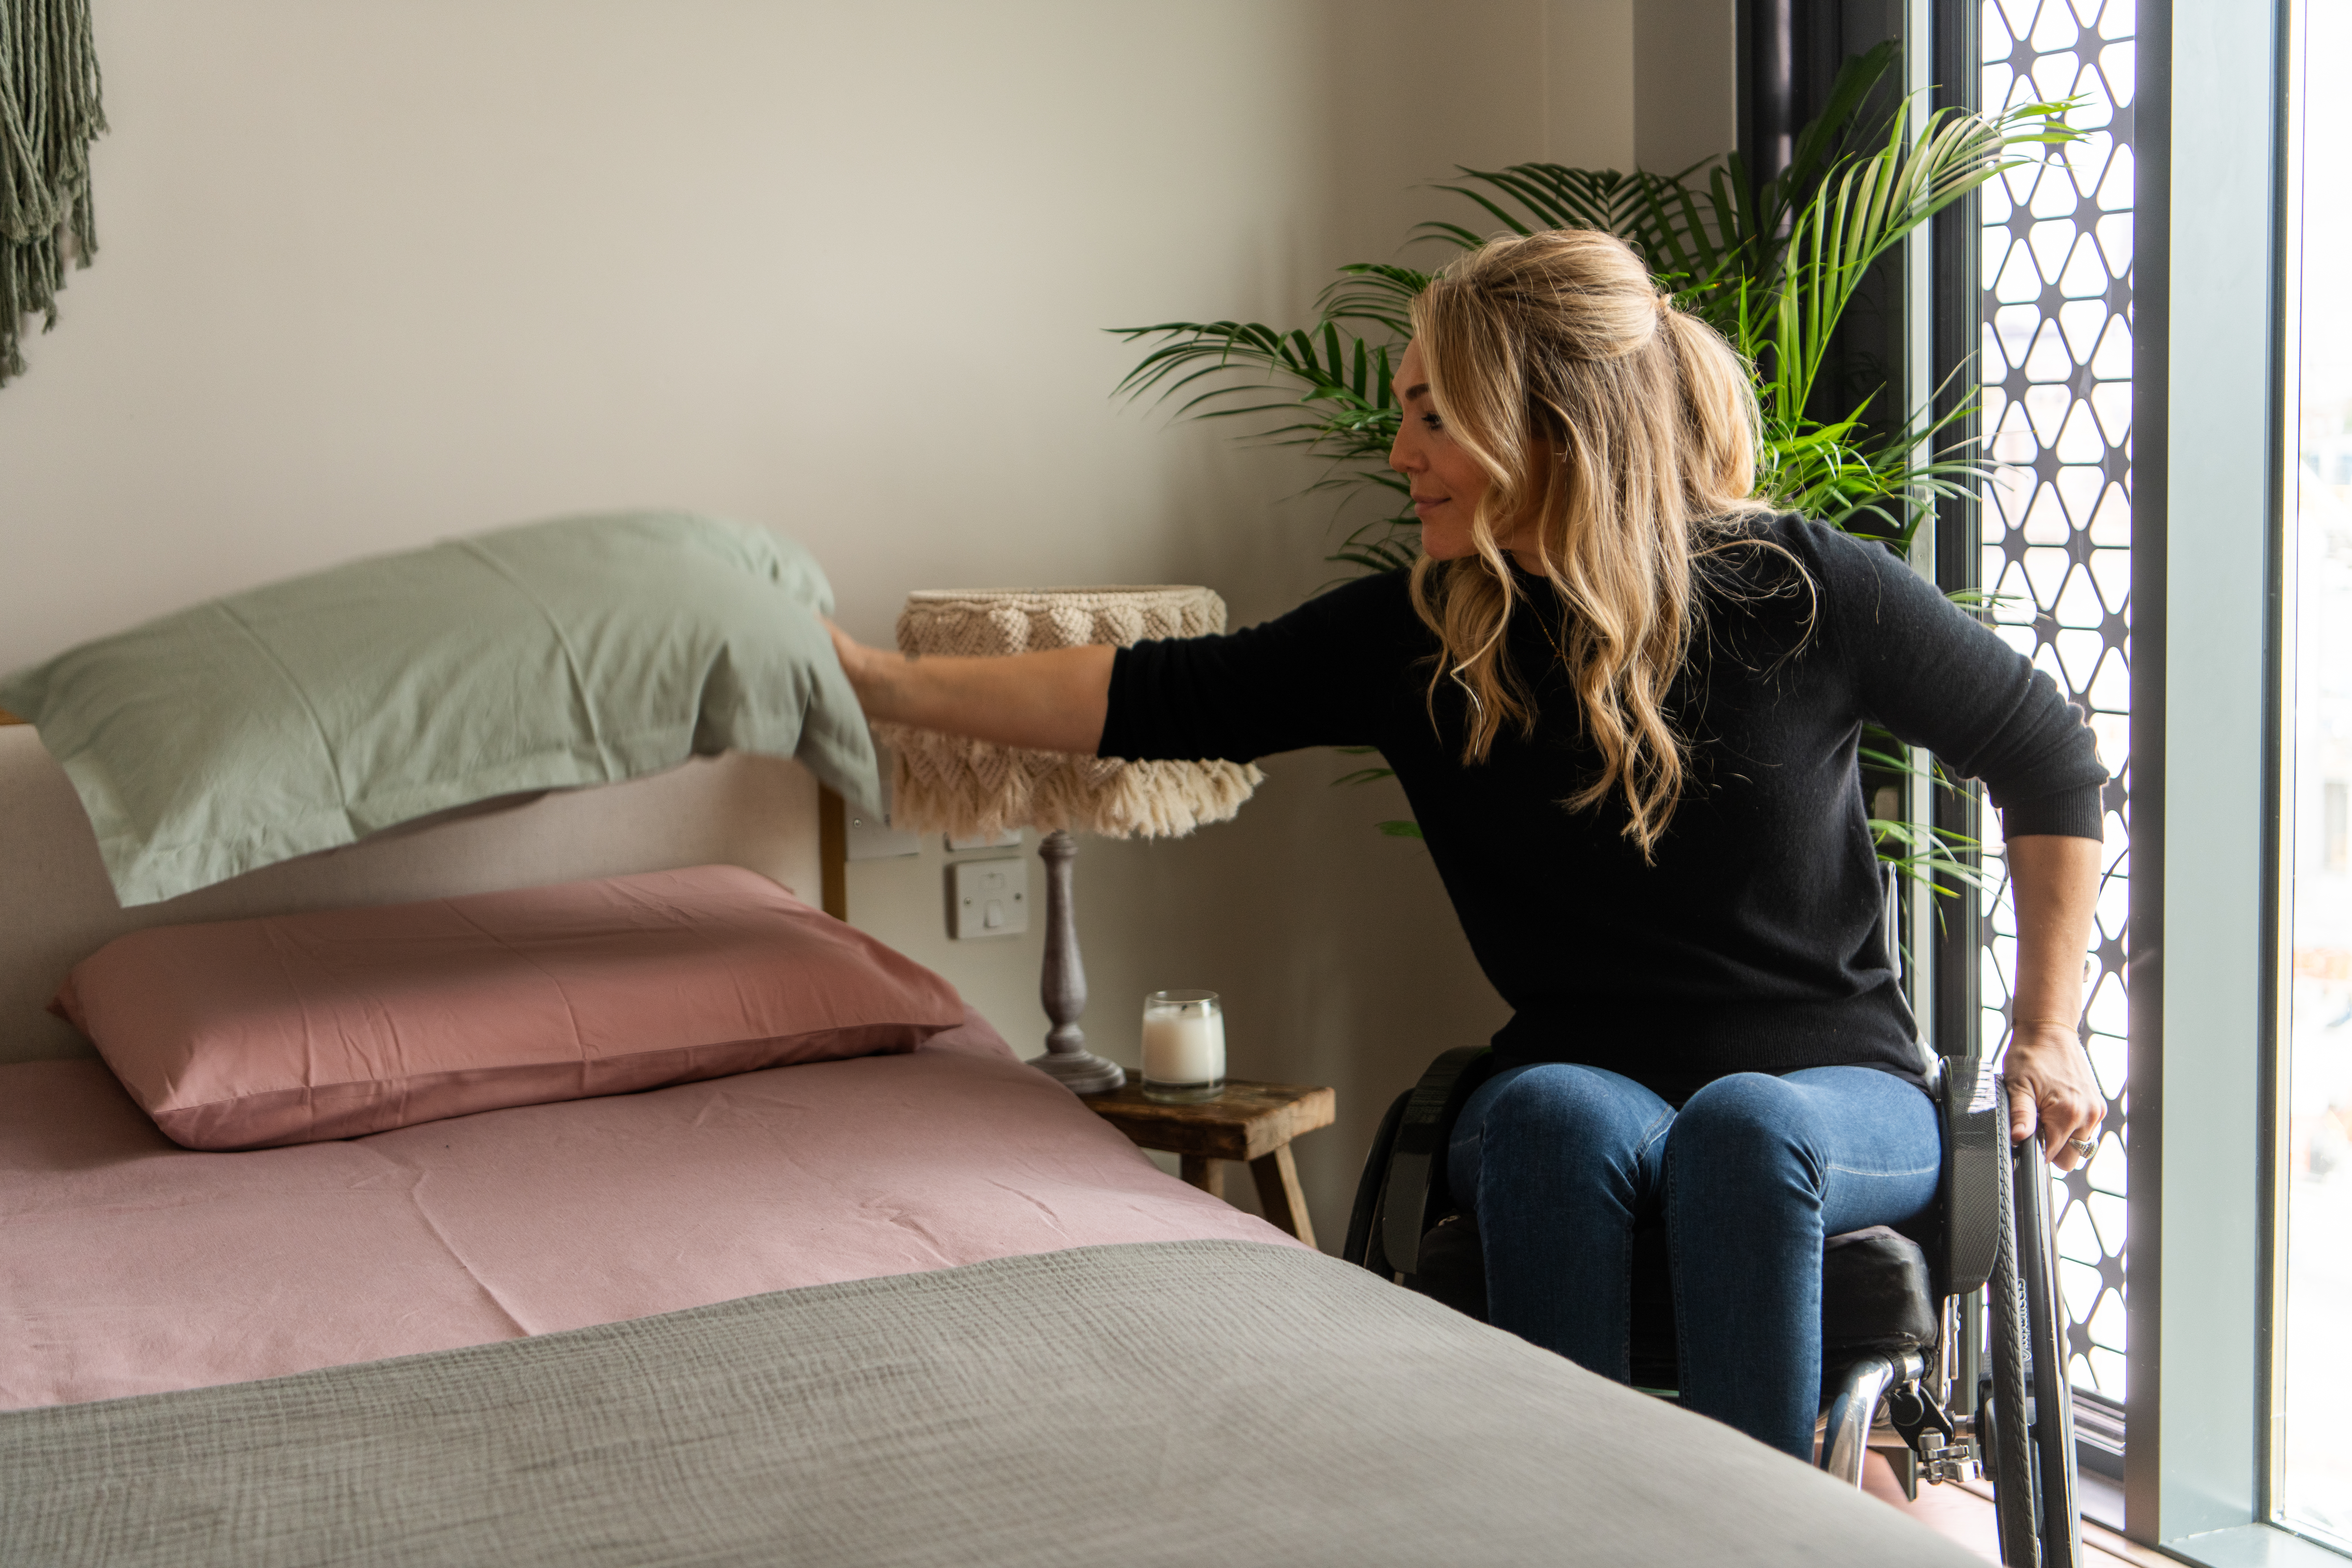 Blonde woman in wheelchair sets a green pillow on a bed as she finishes making the bed.